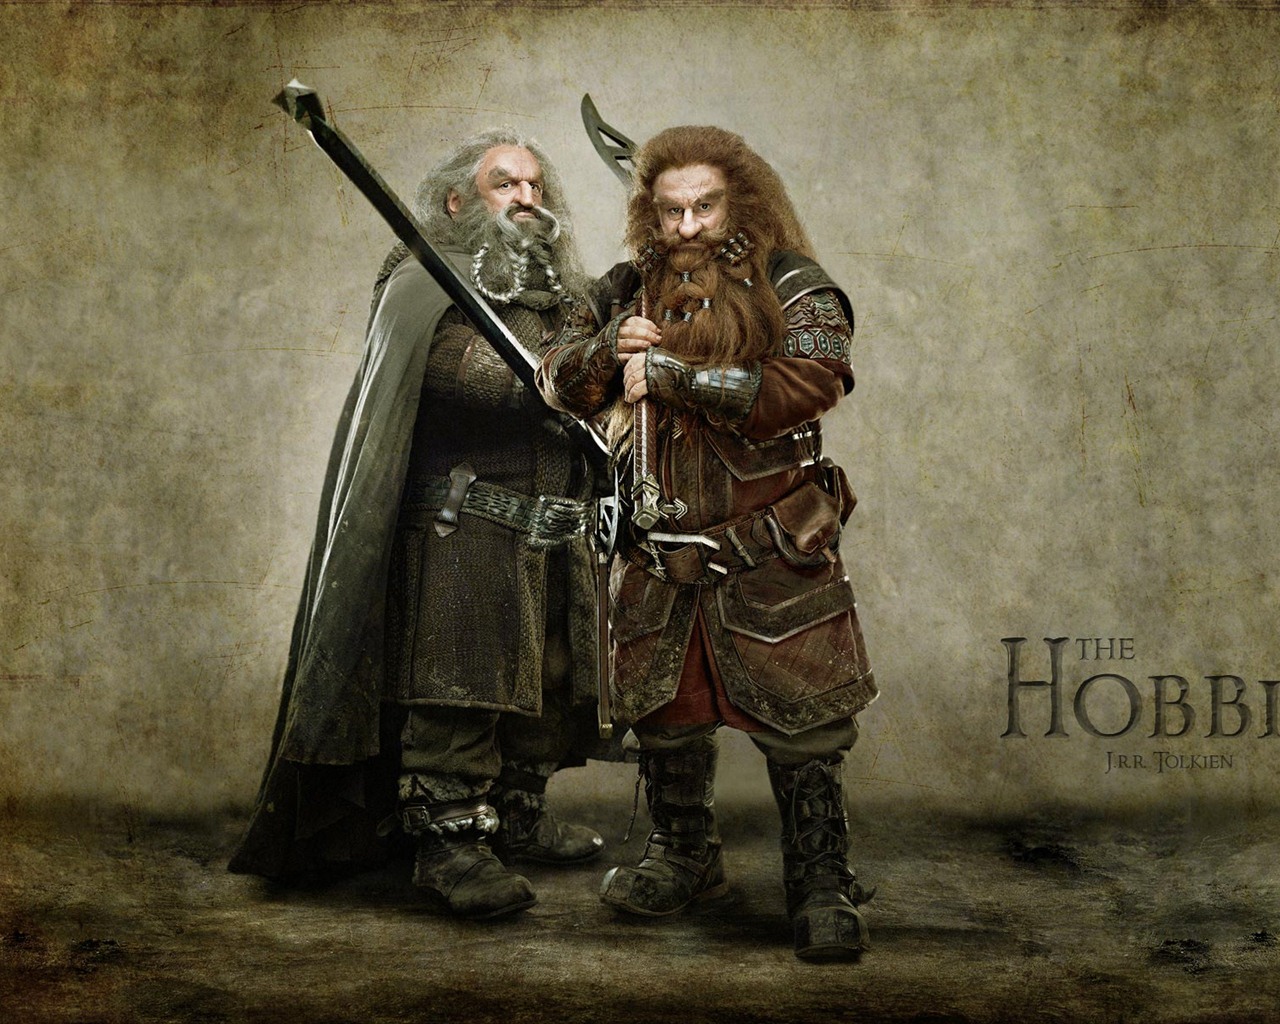 The Hobbit: An Unexpected Journey HD wallpapers #6 - 1280x1024